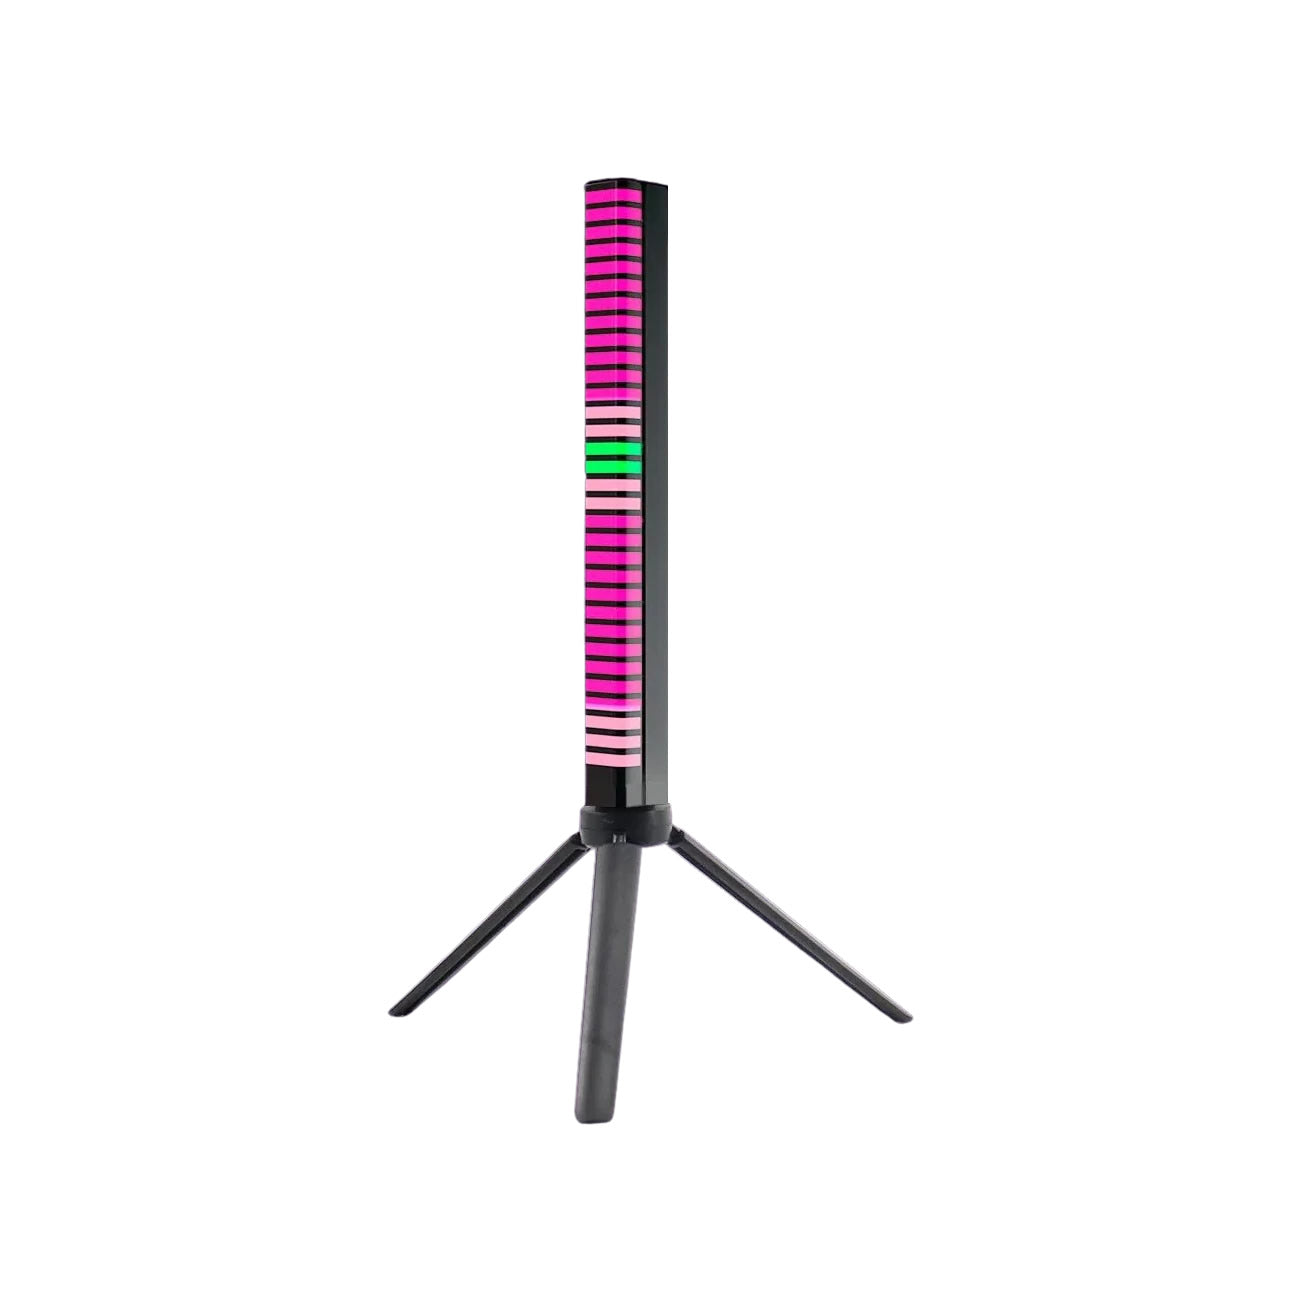 3D RGB Sound Activated Light Bar 2 Pack